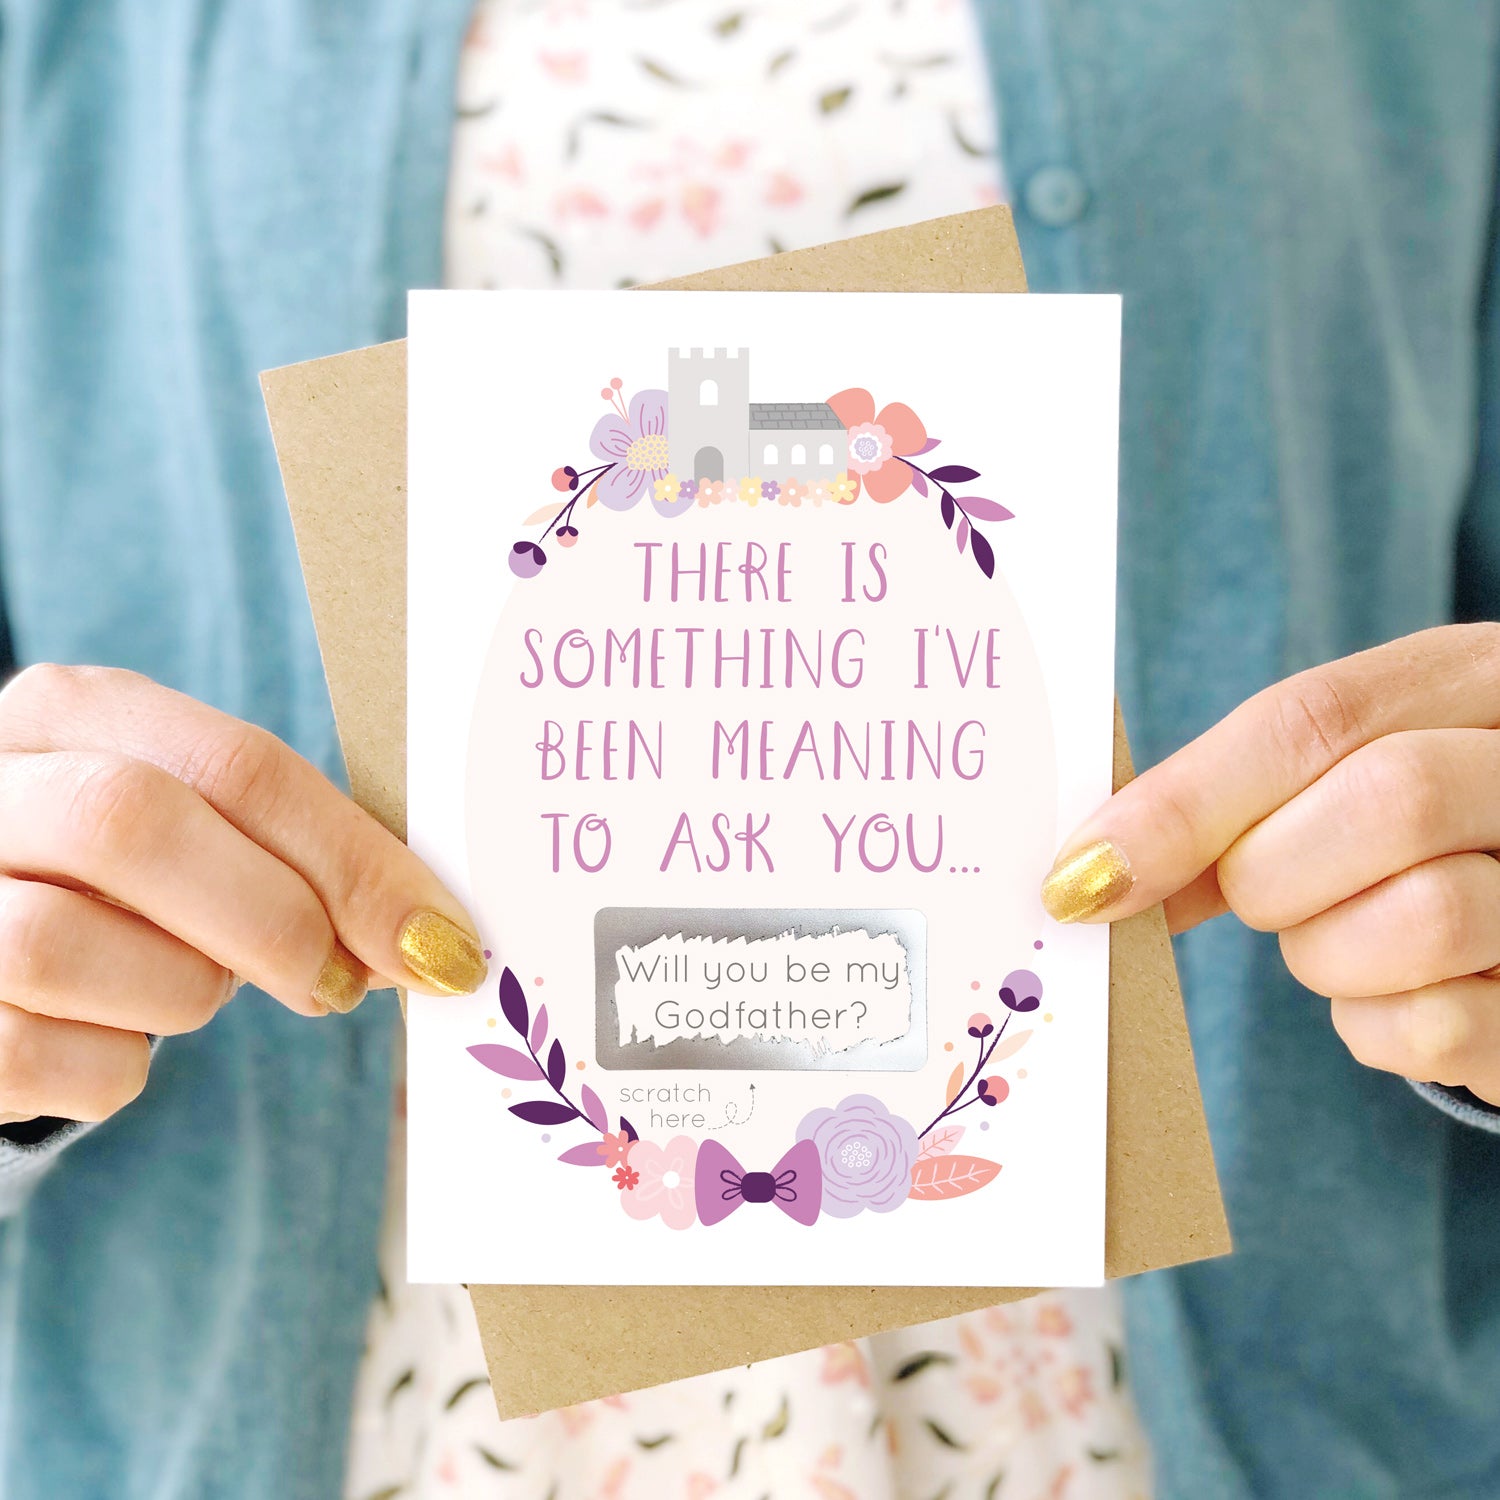 A will you be my godfather scratch and reveal card being held in front of a white dress and blue cardigan. The design features a church, simple florals and a scratch off panel in silver. This is the purple palette.